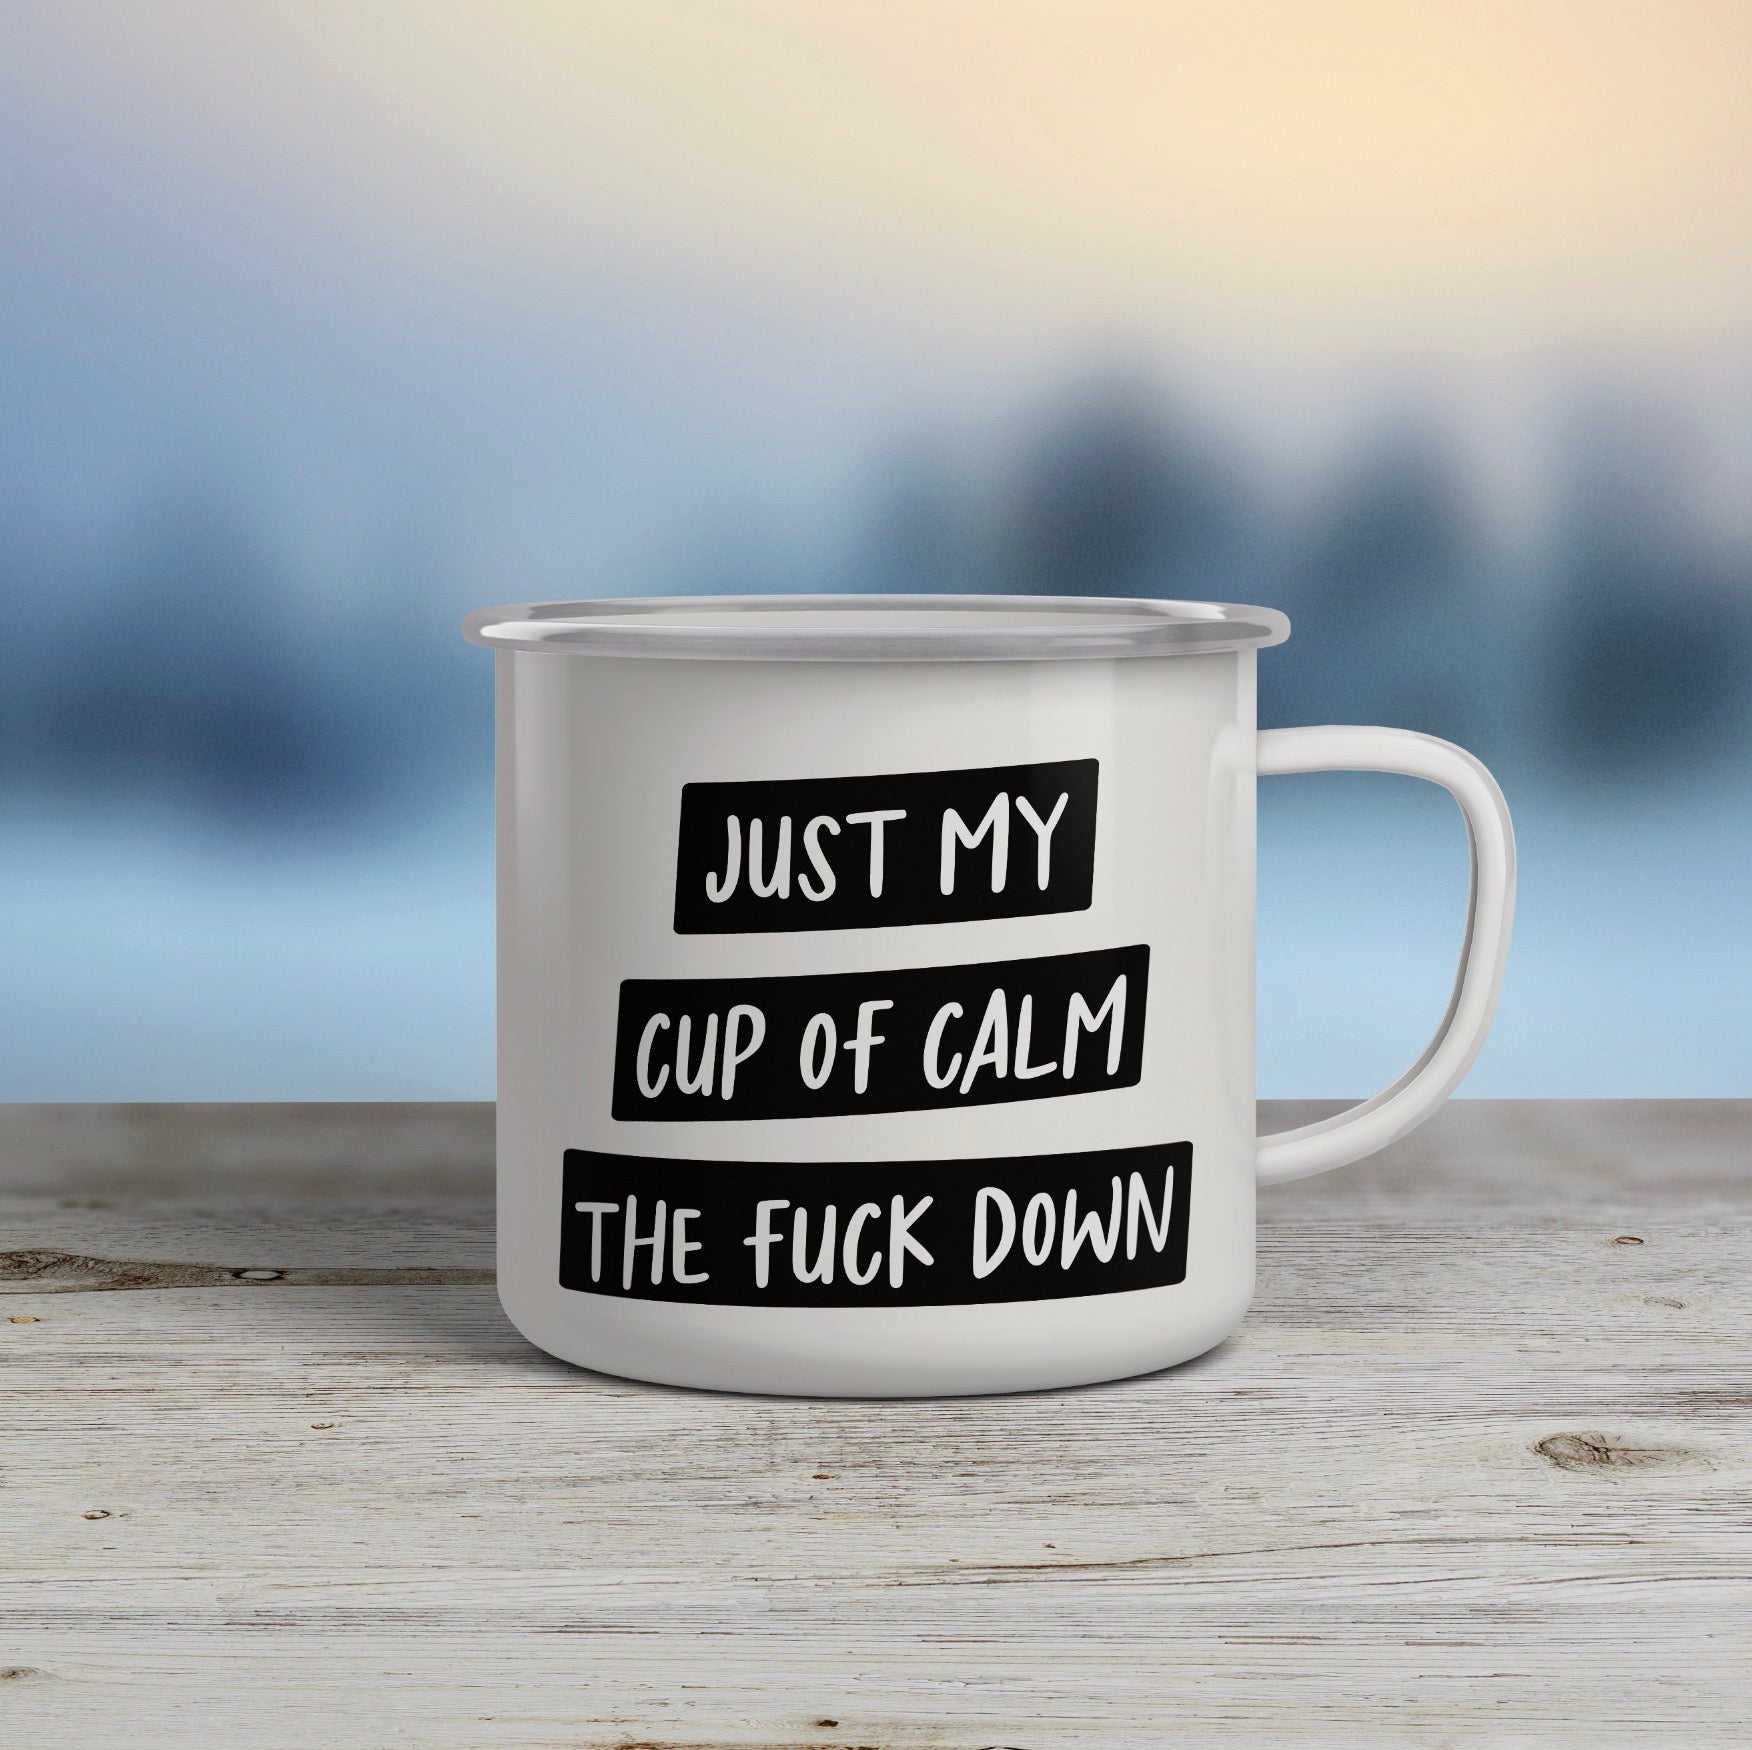 Just My Cup of Calm the Fuck Down.